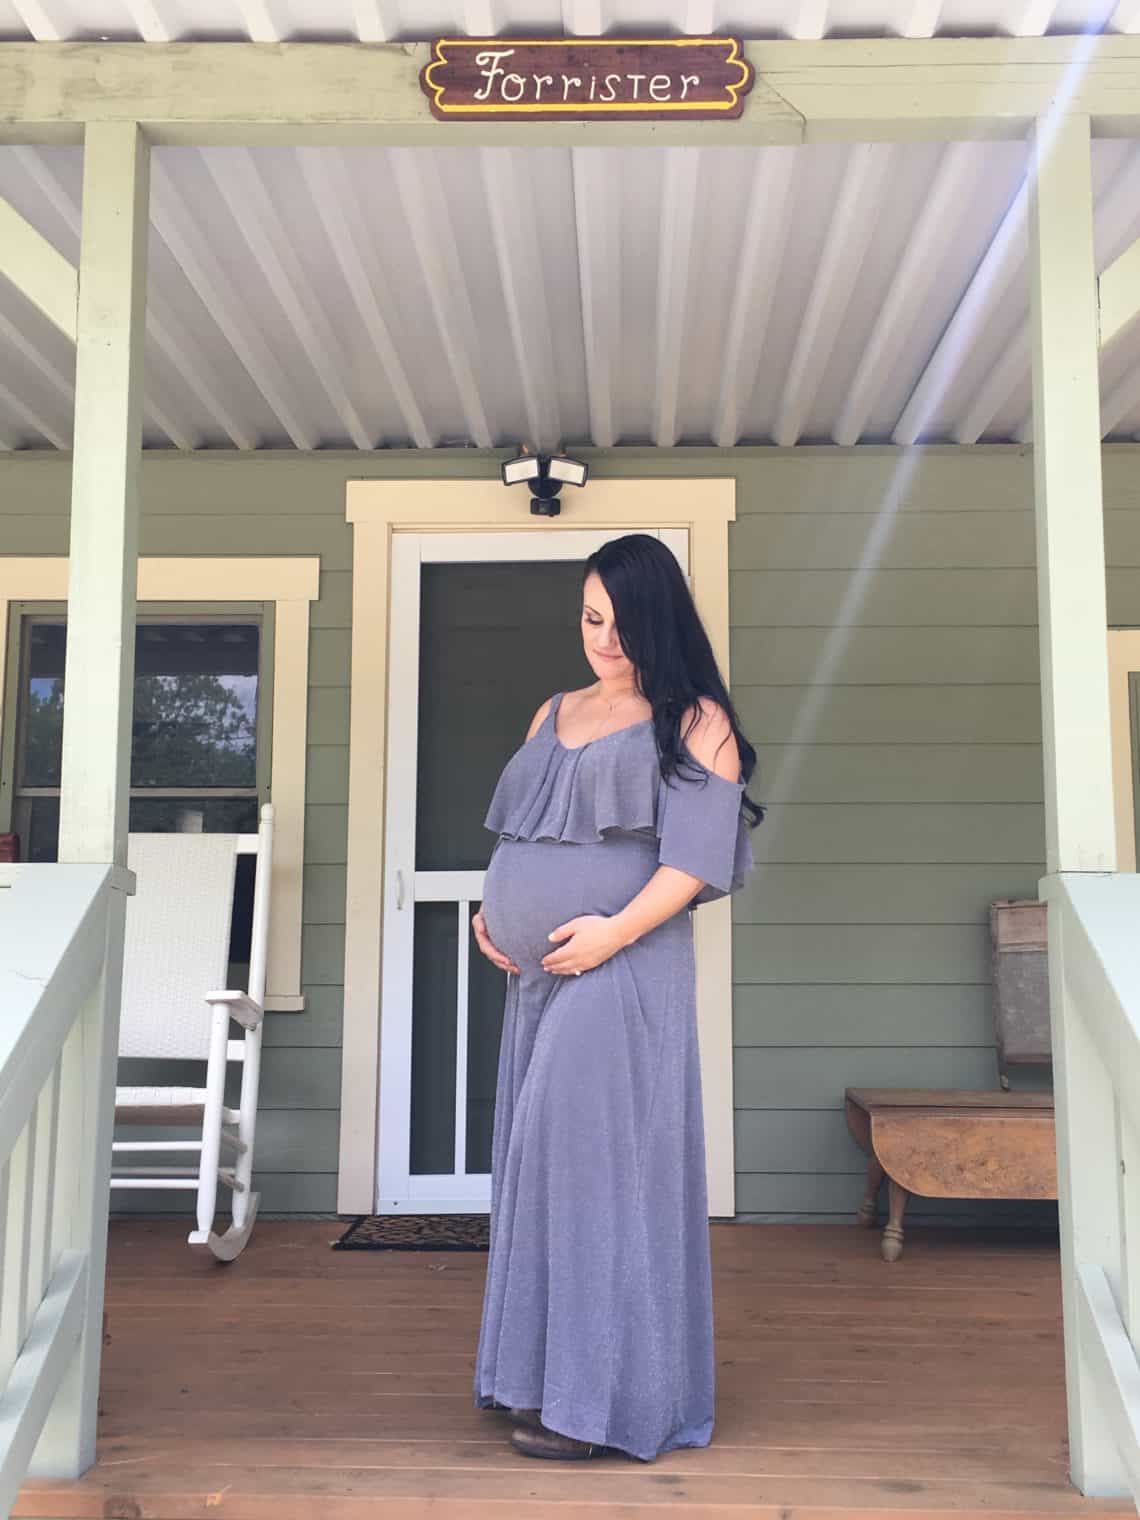 31 Weeks Pregnant with Twins: Tips, Advice & How to Prep - Twiniversity